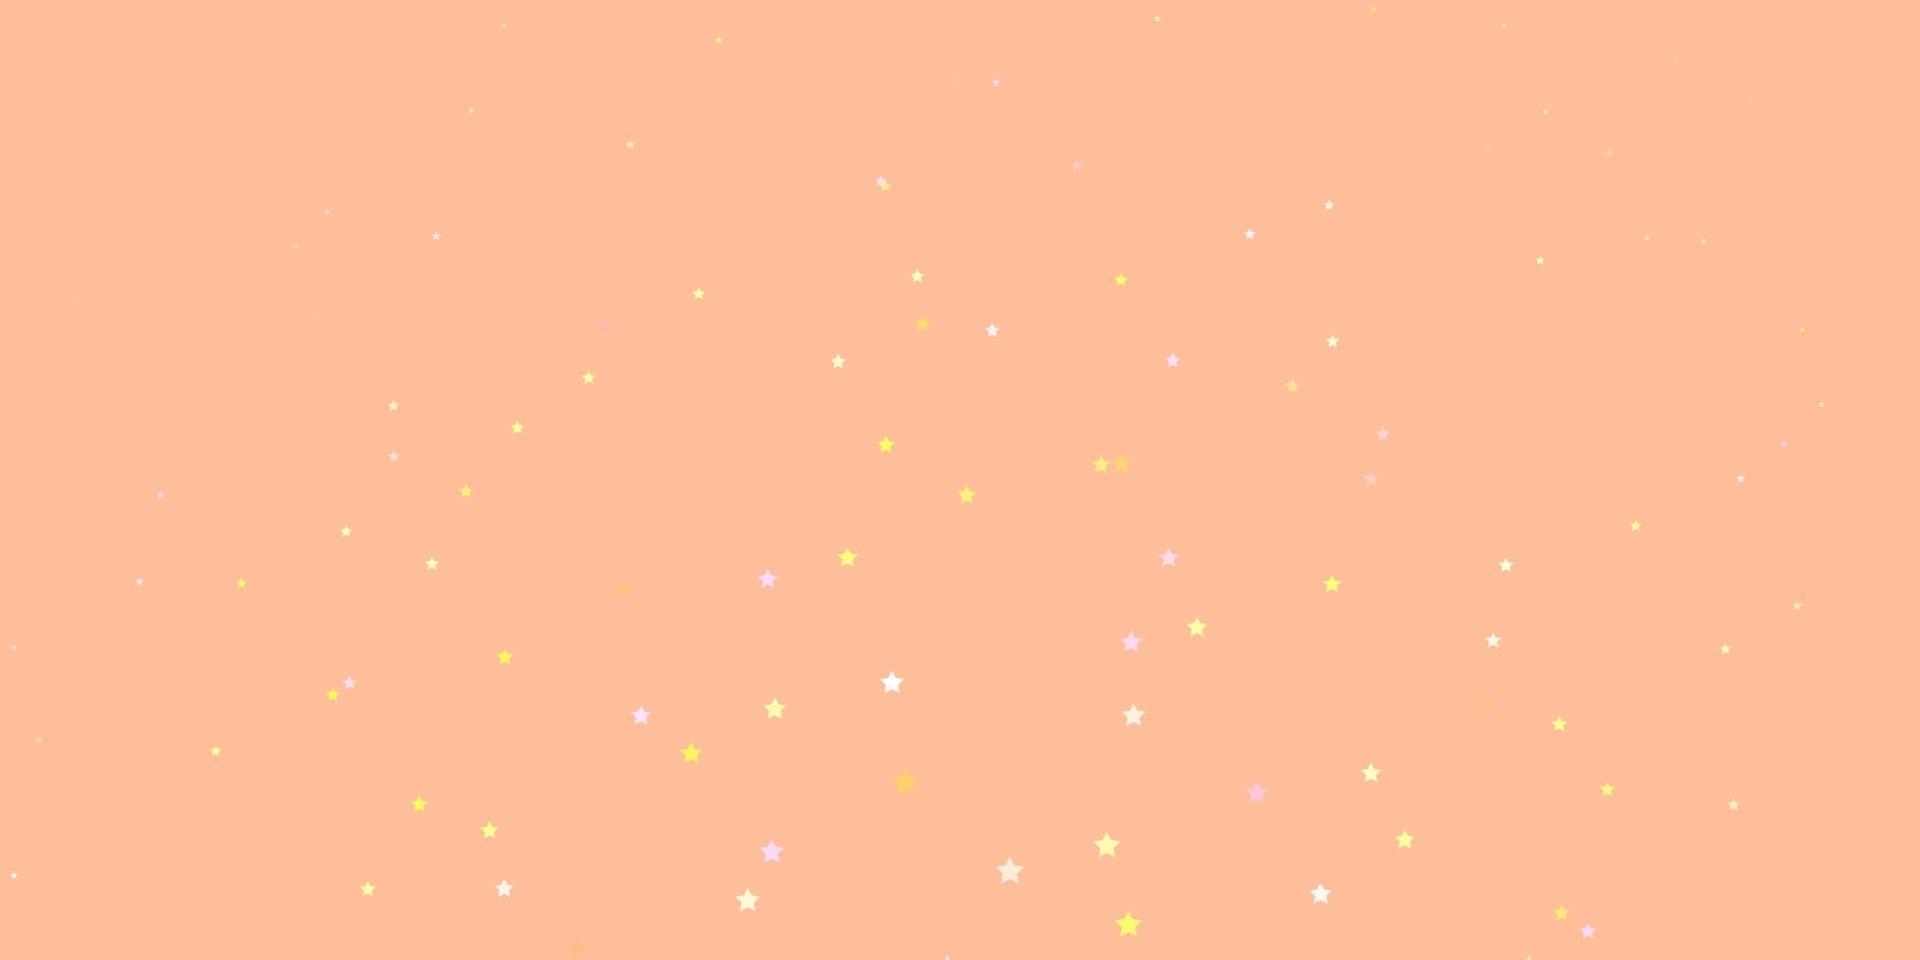 Dark Pink, Yellow vector background with small and big stars.